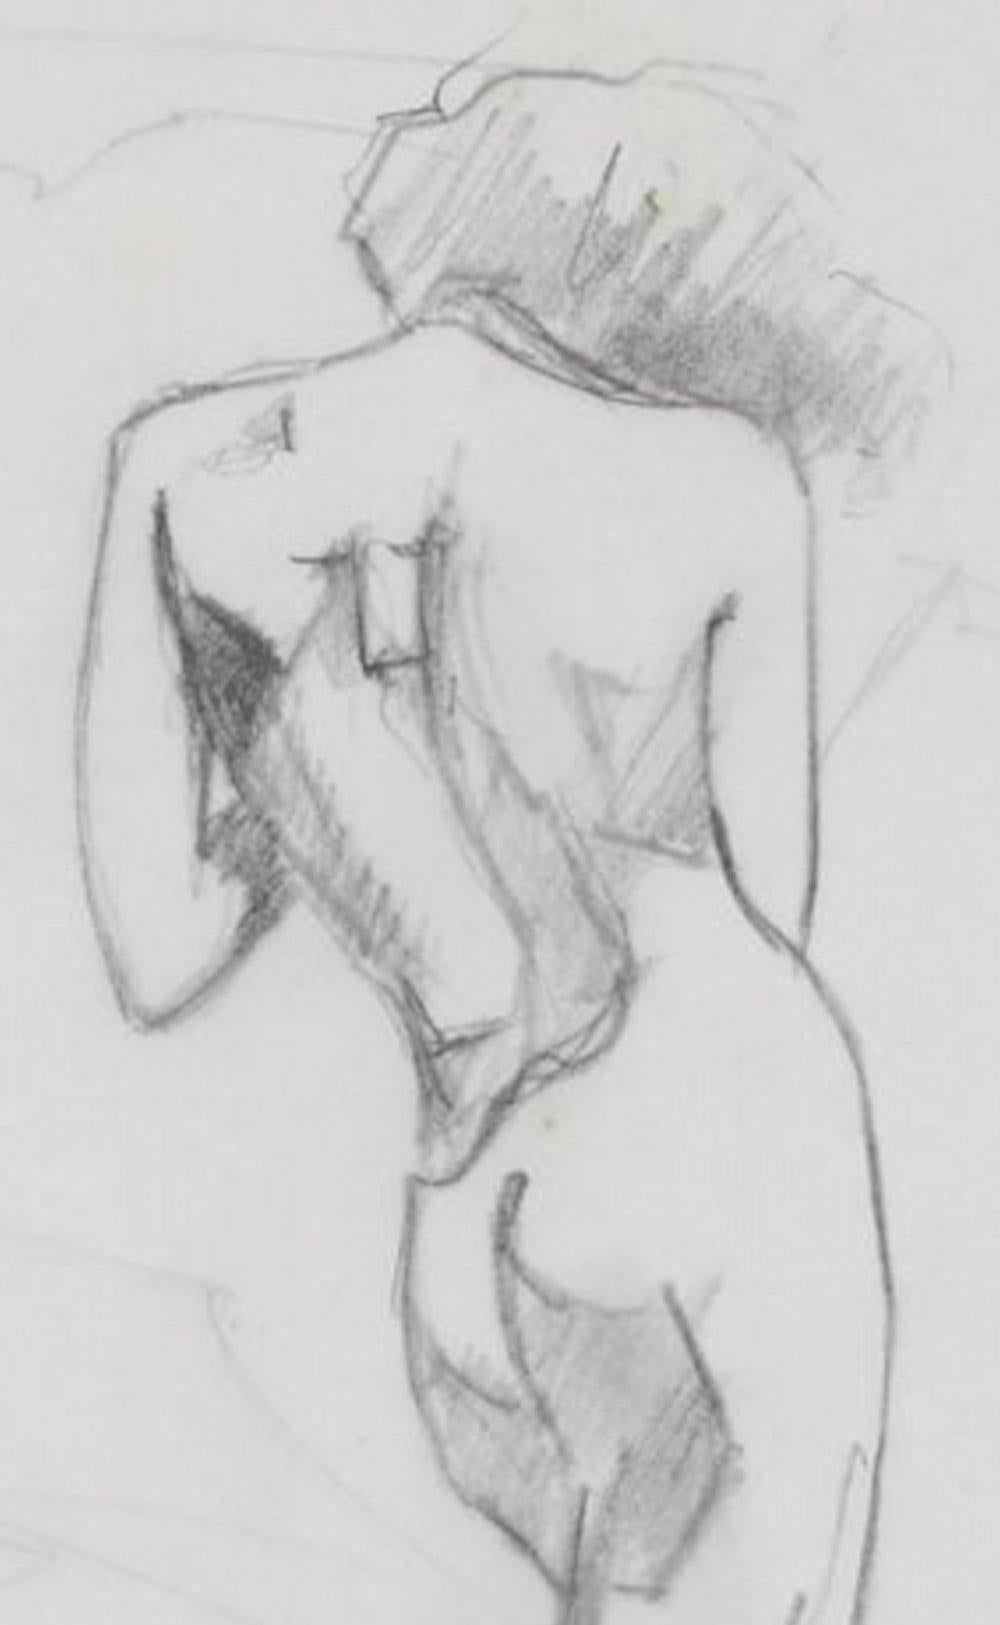 This late 20th century graphite on paper monochromatic nude figure of a woman is by Swedish artist Anna Poole (1960-2012). Poole left Sweden to study at the SF Art Institute in the 1980s. She spent much of her adult life living on a houseboat in the